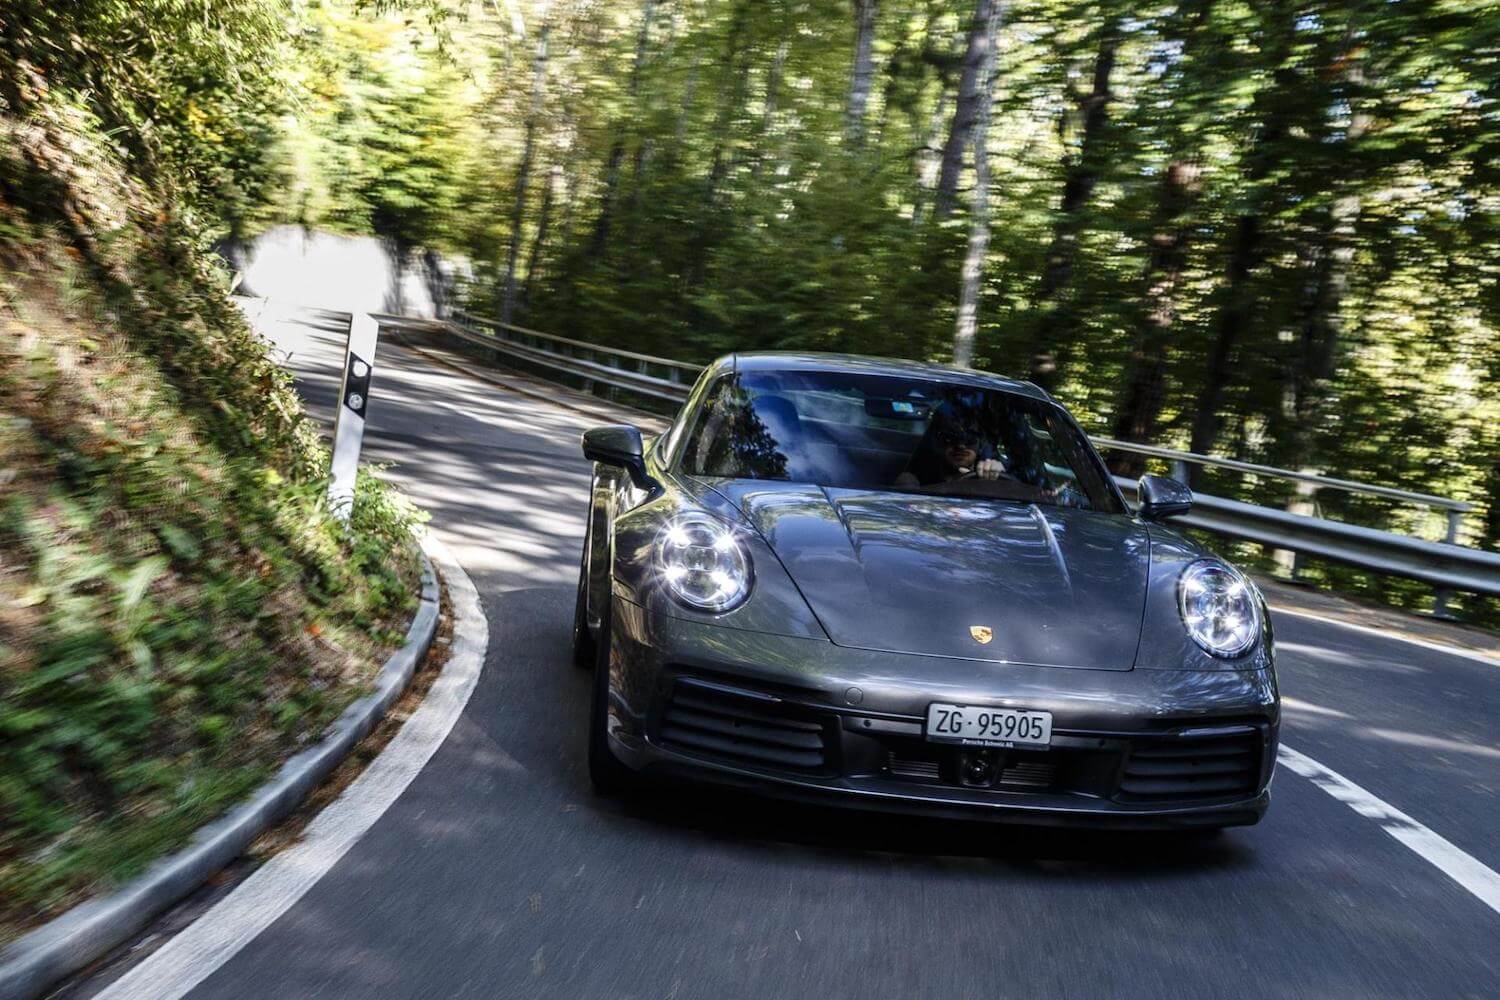 A gray Porsche 911 sports car races around a corner in a mountain road and towards the camera, trees visible in the background.